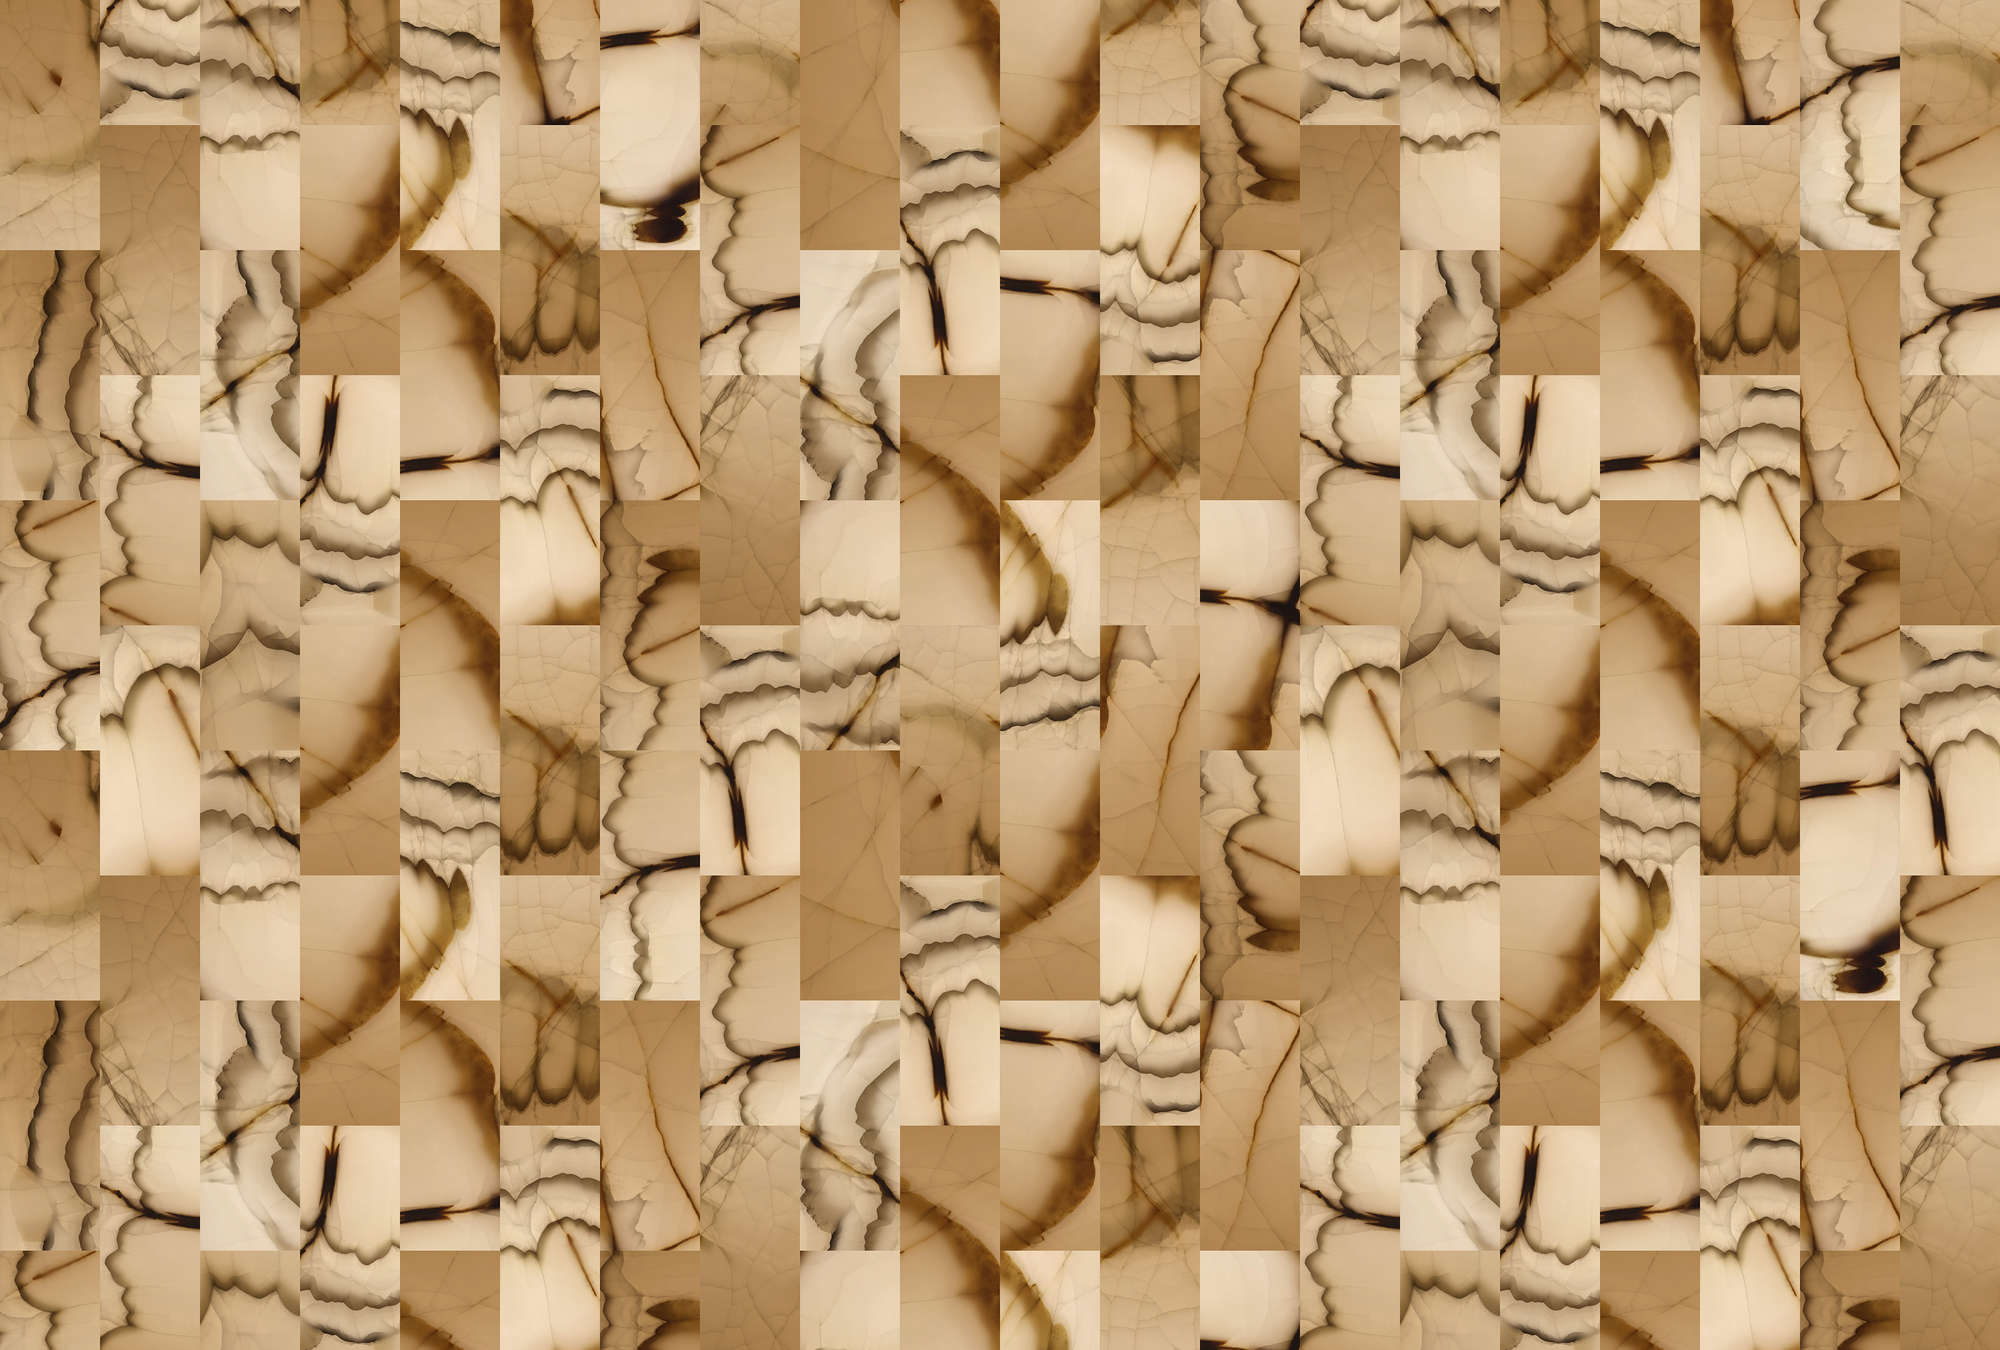             Cut stone 1 - Photo wallpaper with stone look abstract - Beige, Brown | Textured non-woven
        